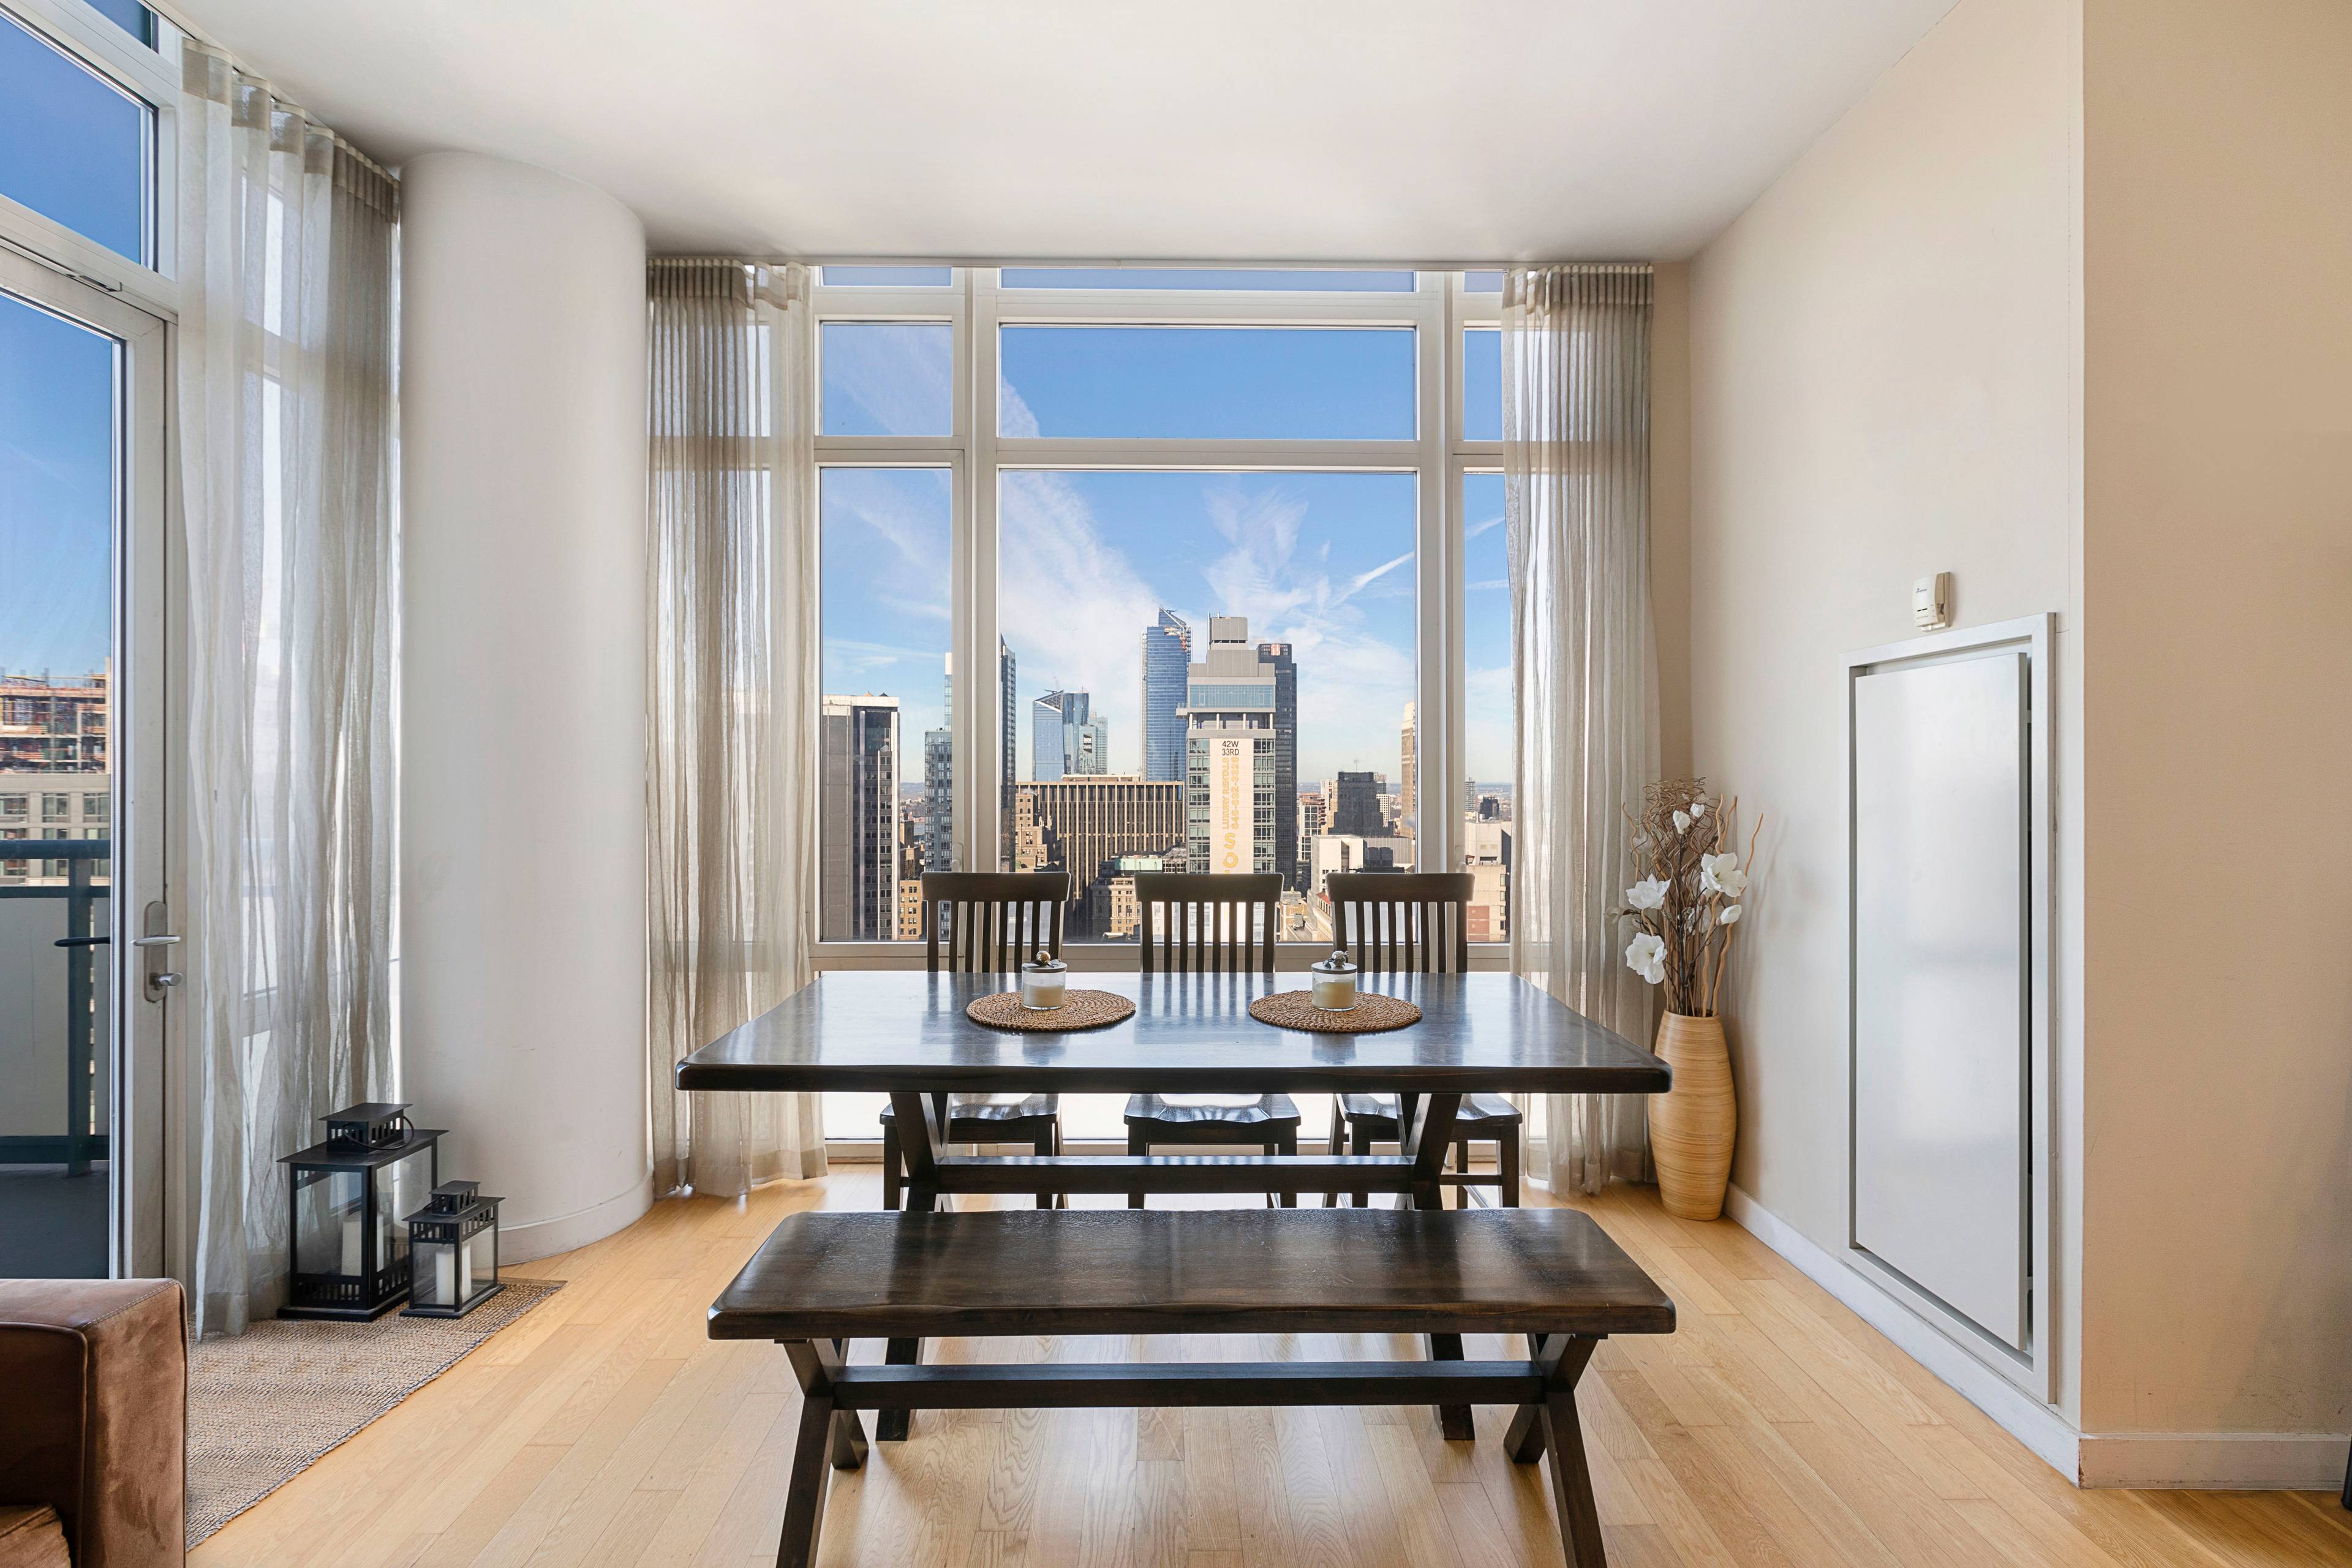 Just Listed! High Floor 3BD 3BA Residence with Prime Views of Manhattan Skyline & Empire State Building!